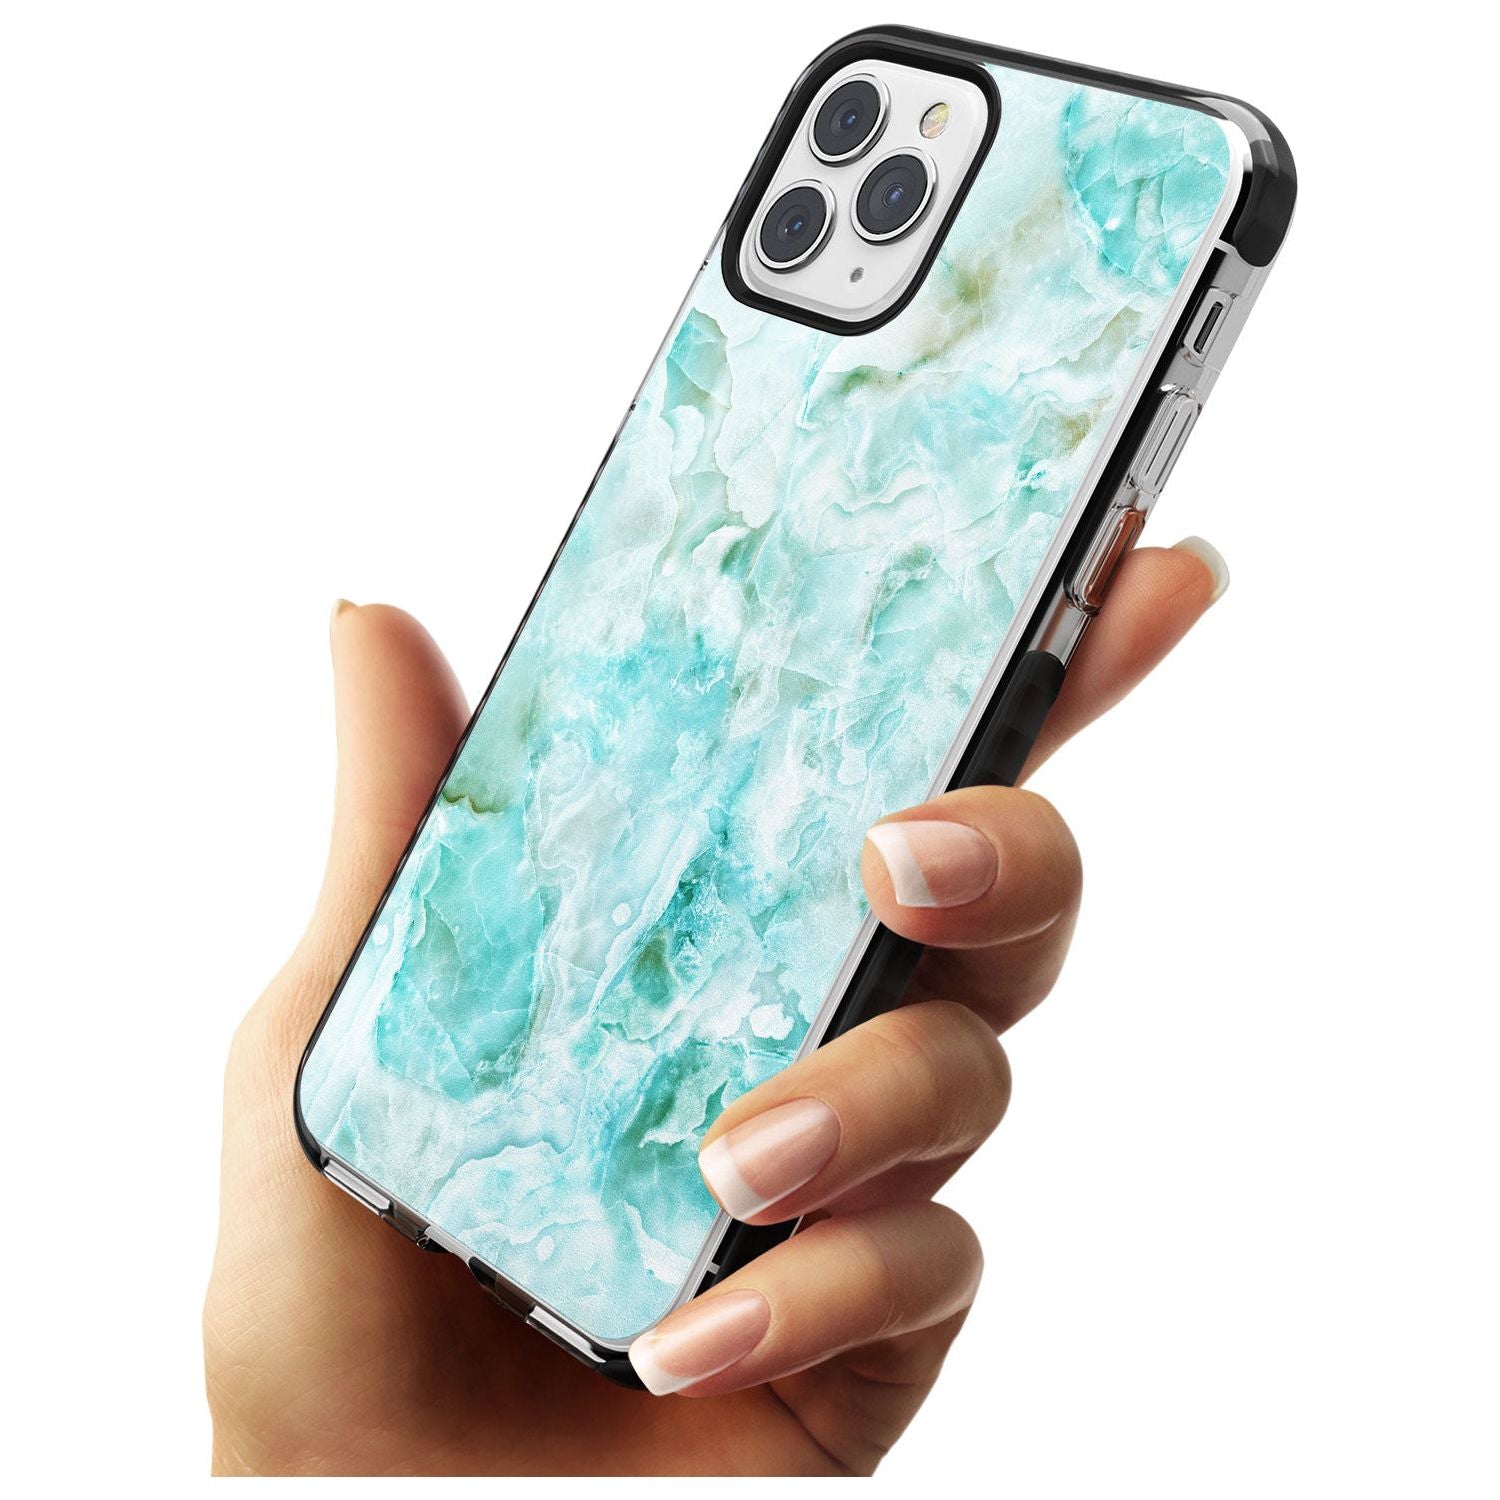 Turquoise Aqua Onyx Marble Pink Fade Impact Phone Case for iPhone 11